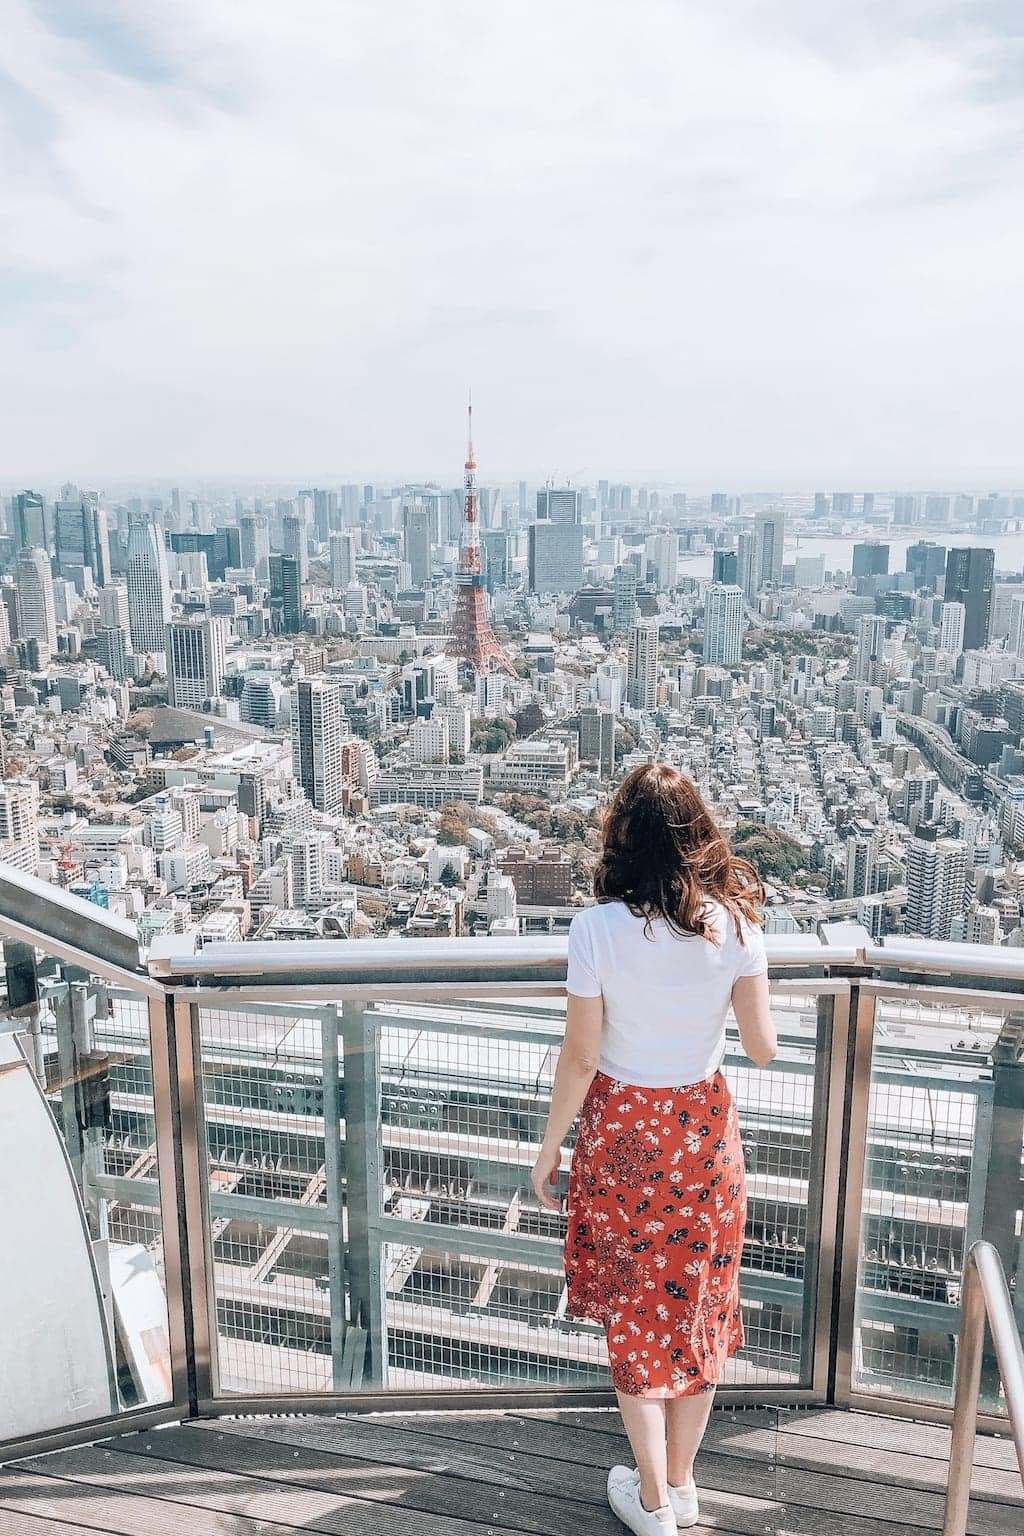 Things to Do in Tokyo: City View and Sky Deck